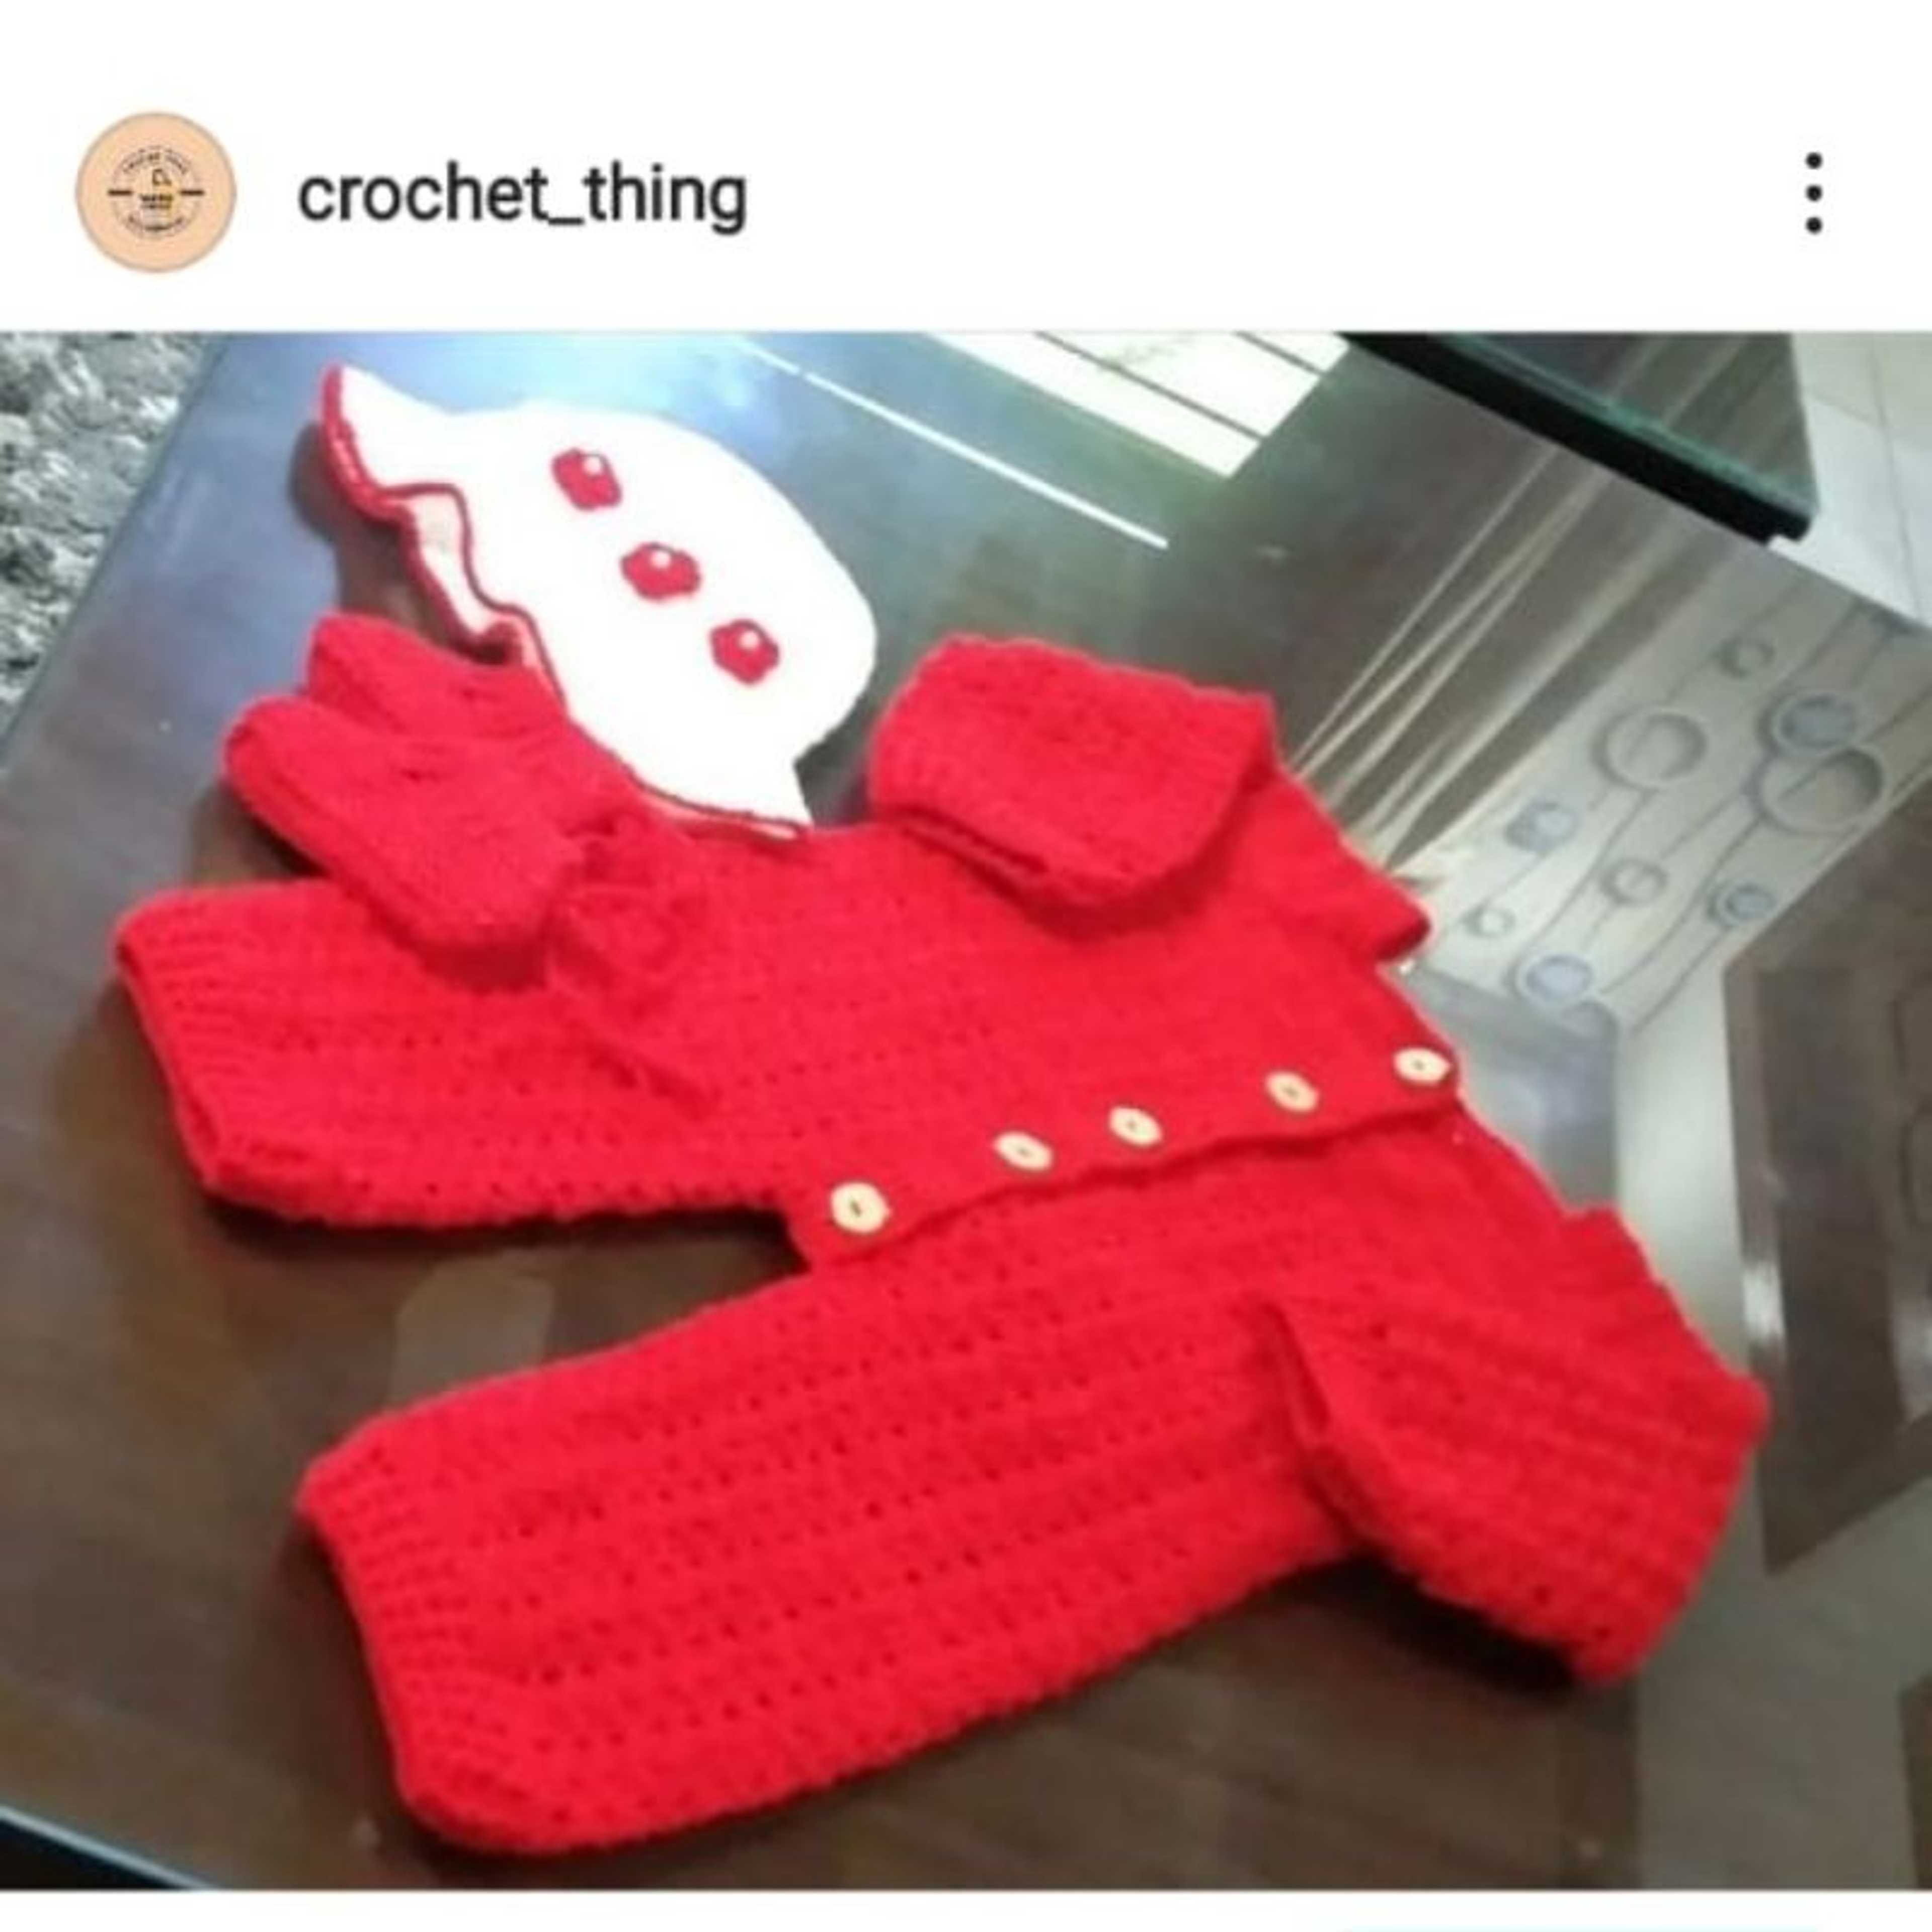 Complete Romper Set Handmade - Red Color (0 to 6 Months Size)